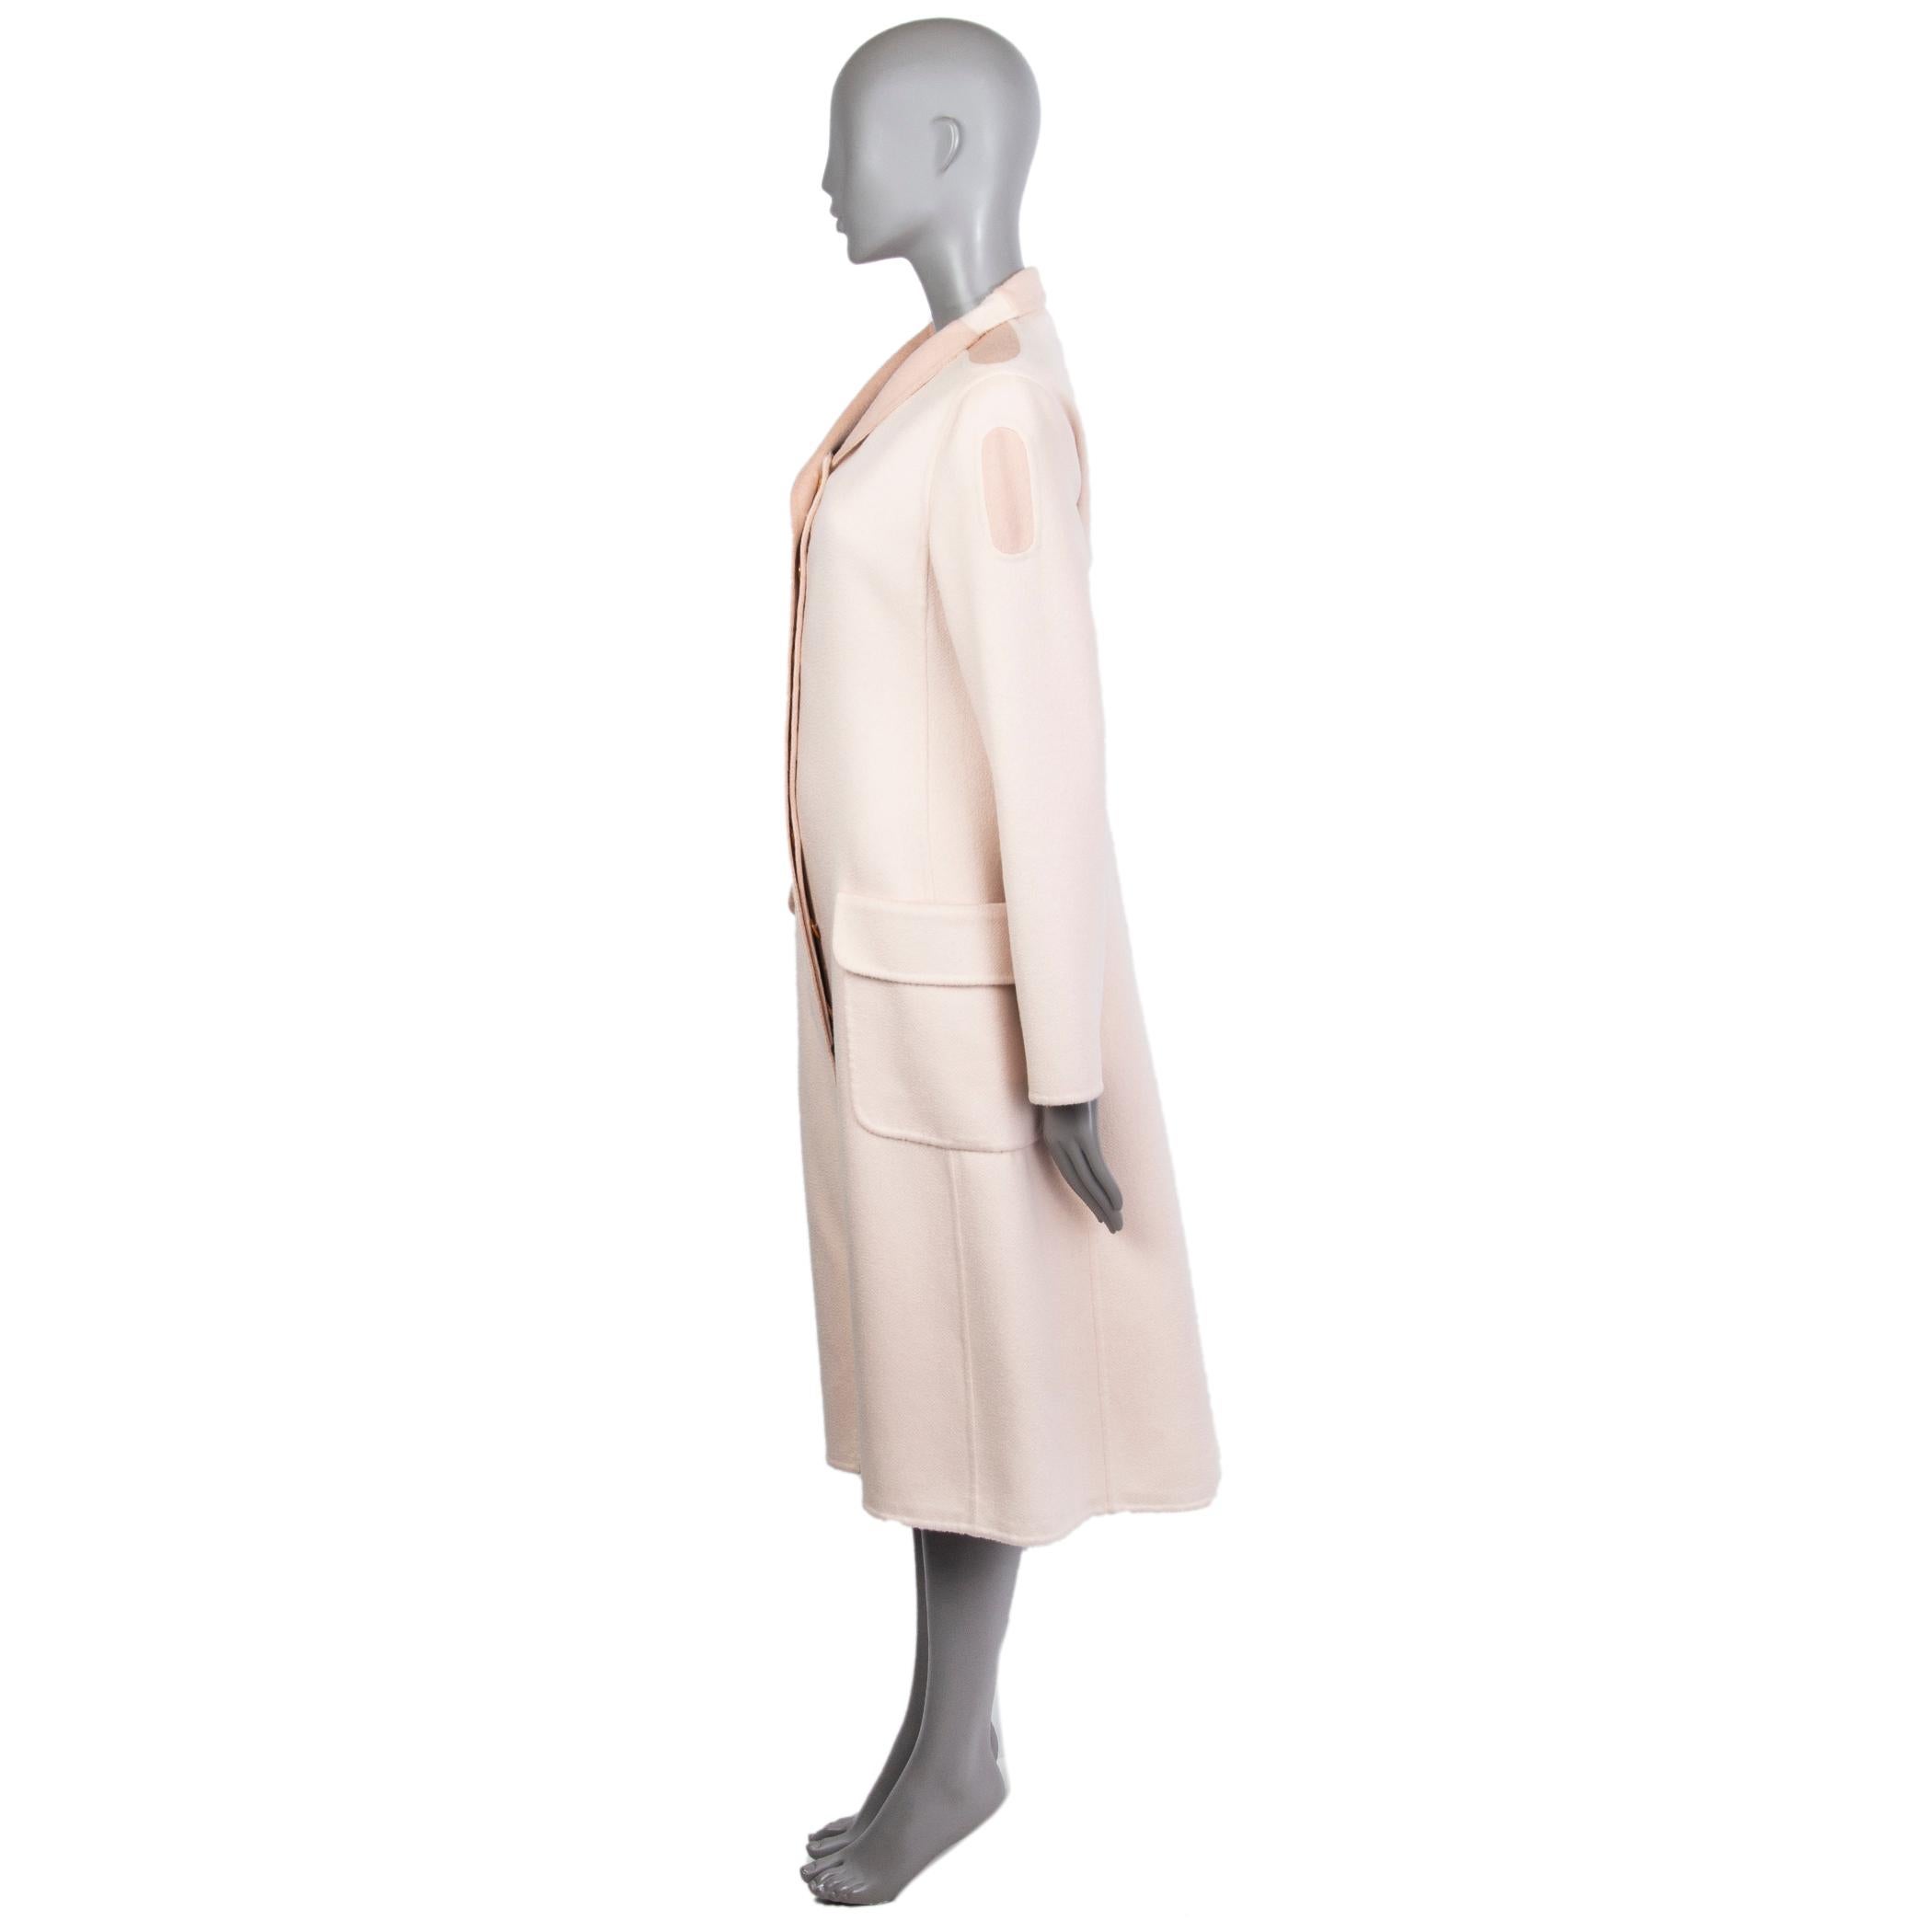 Alexander McQueen coat in light and deco rose cashmere (100%). With slit neck, shoulder patches, two flap pockets on the sides, slit on the back, and weight chain around the inside of the hemline. Unlined. Has been worn and is in excellent